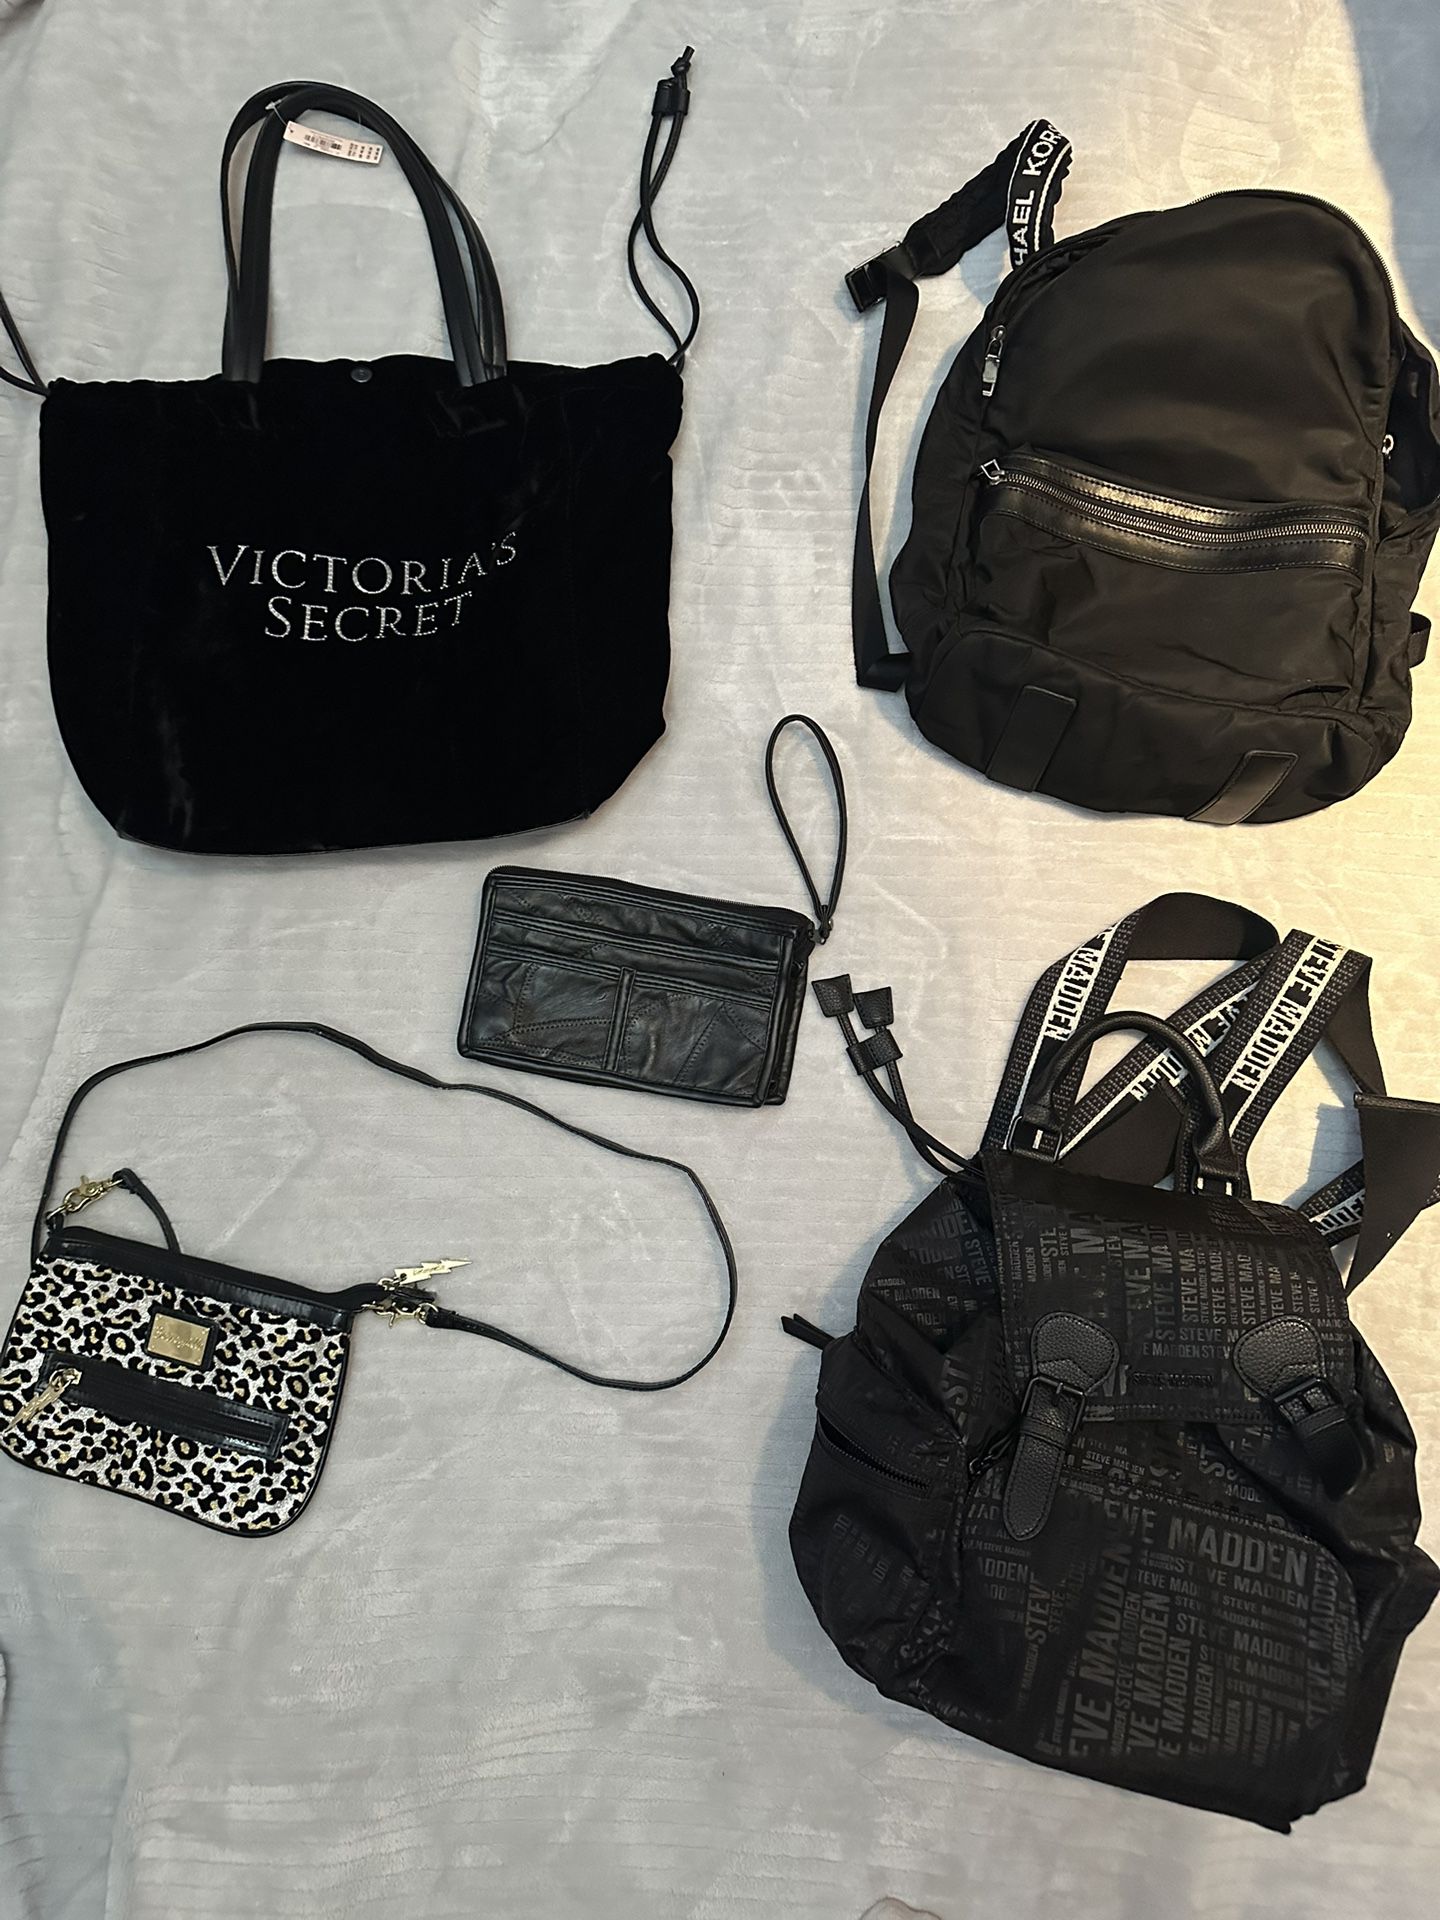 5 PURSES BUNDLE $30 FOR ALL